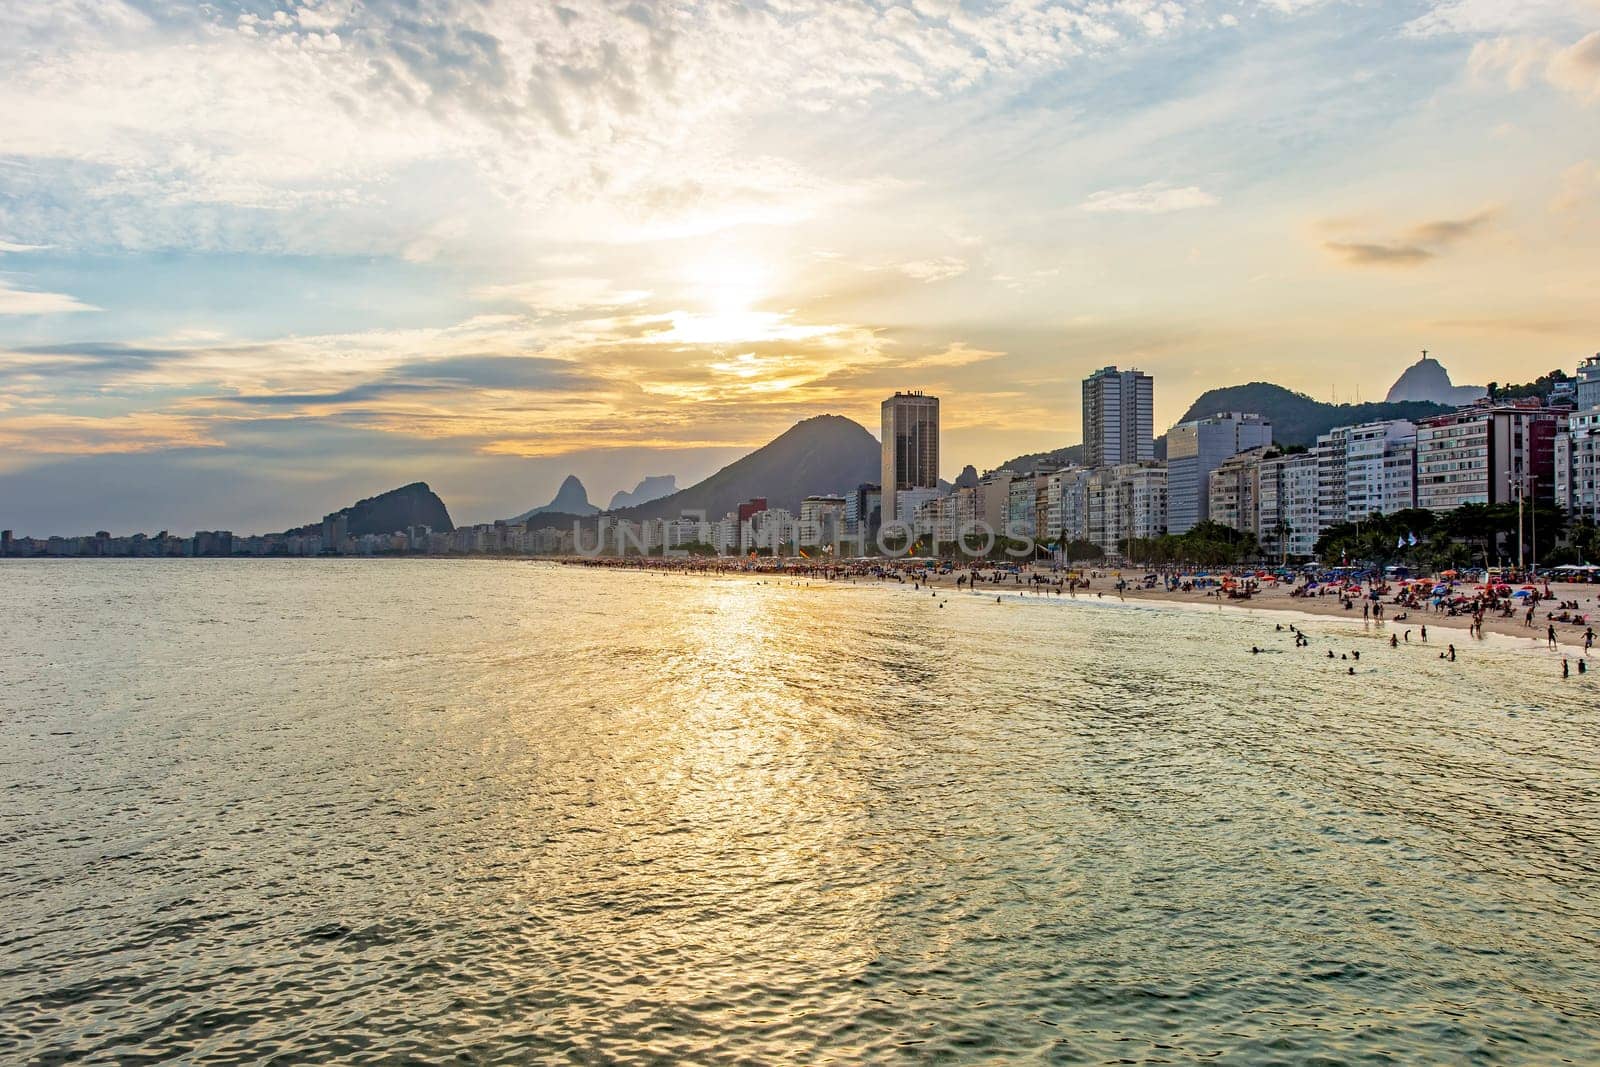 Sunset on the famous Copacabana beach with the sea, sand, mountains and buildings in the city of Rio de Janeiro